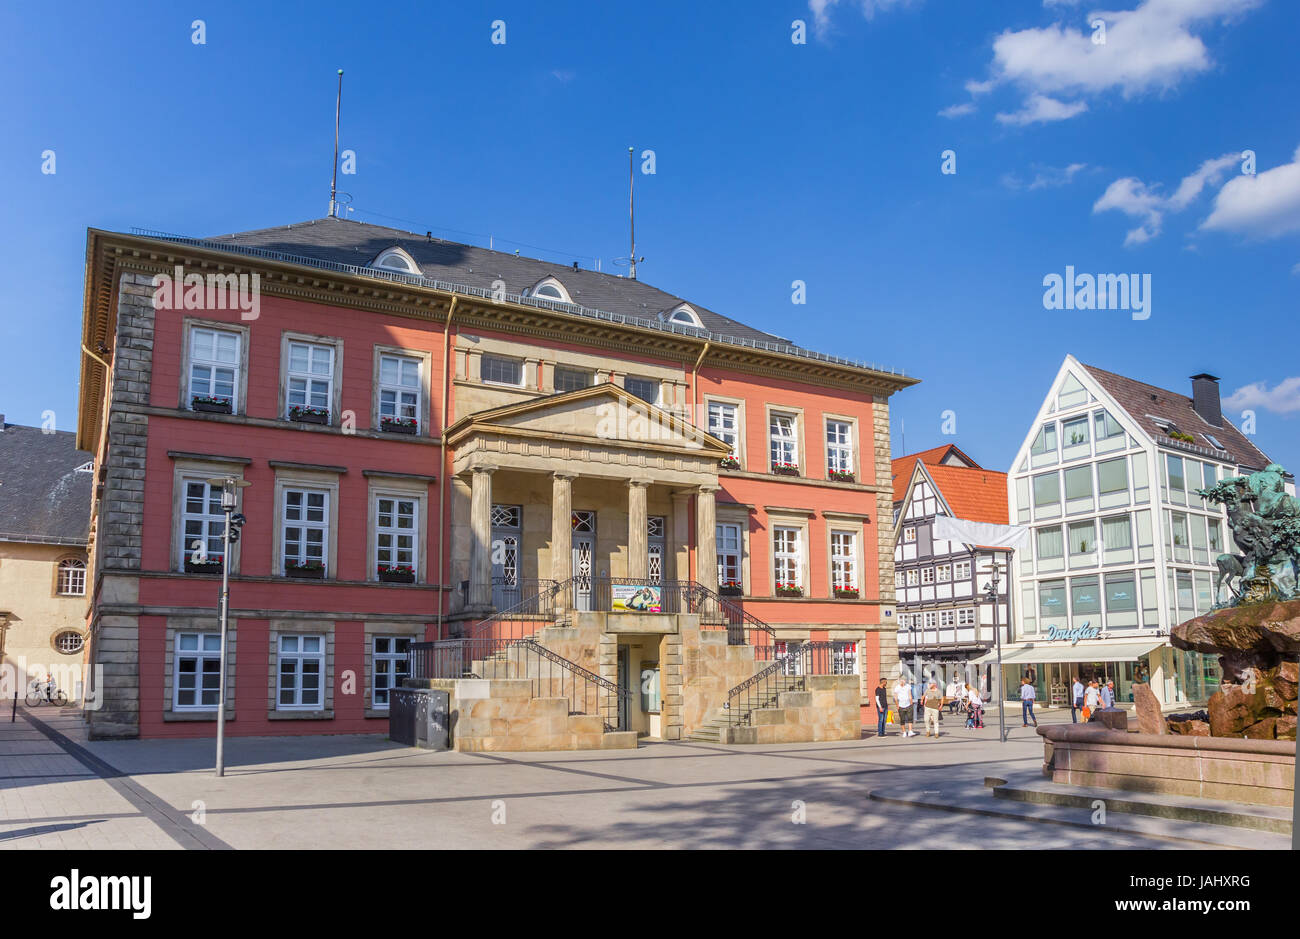 Old town hall building at the market square of Detmold, Germany Stock Photo